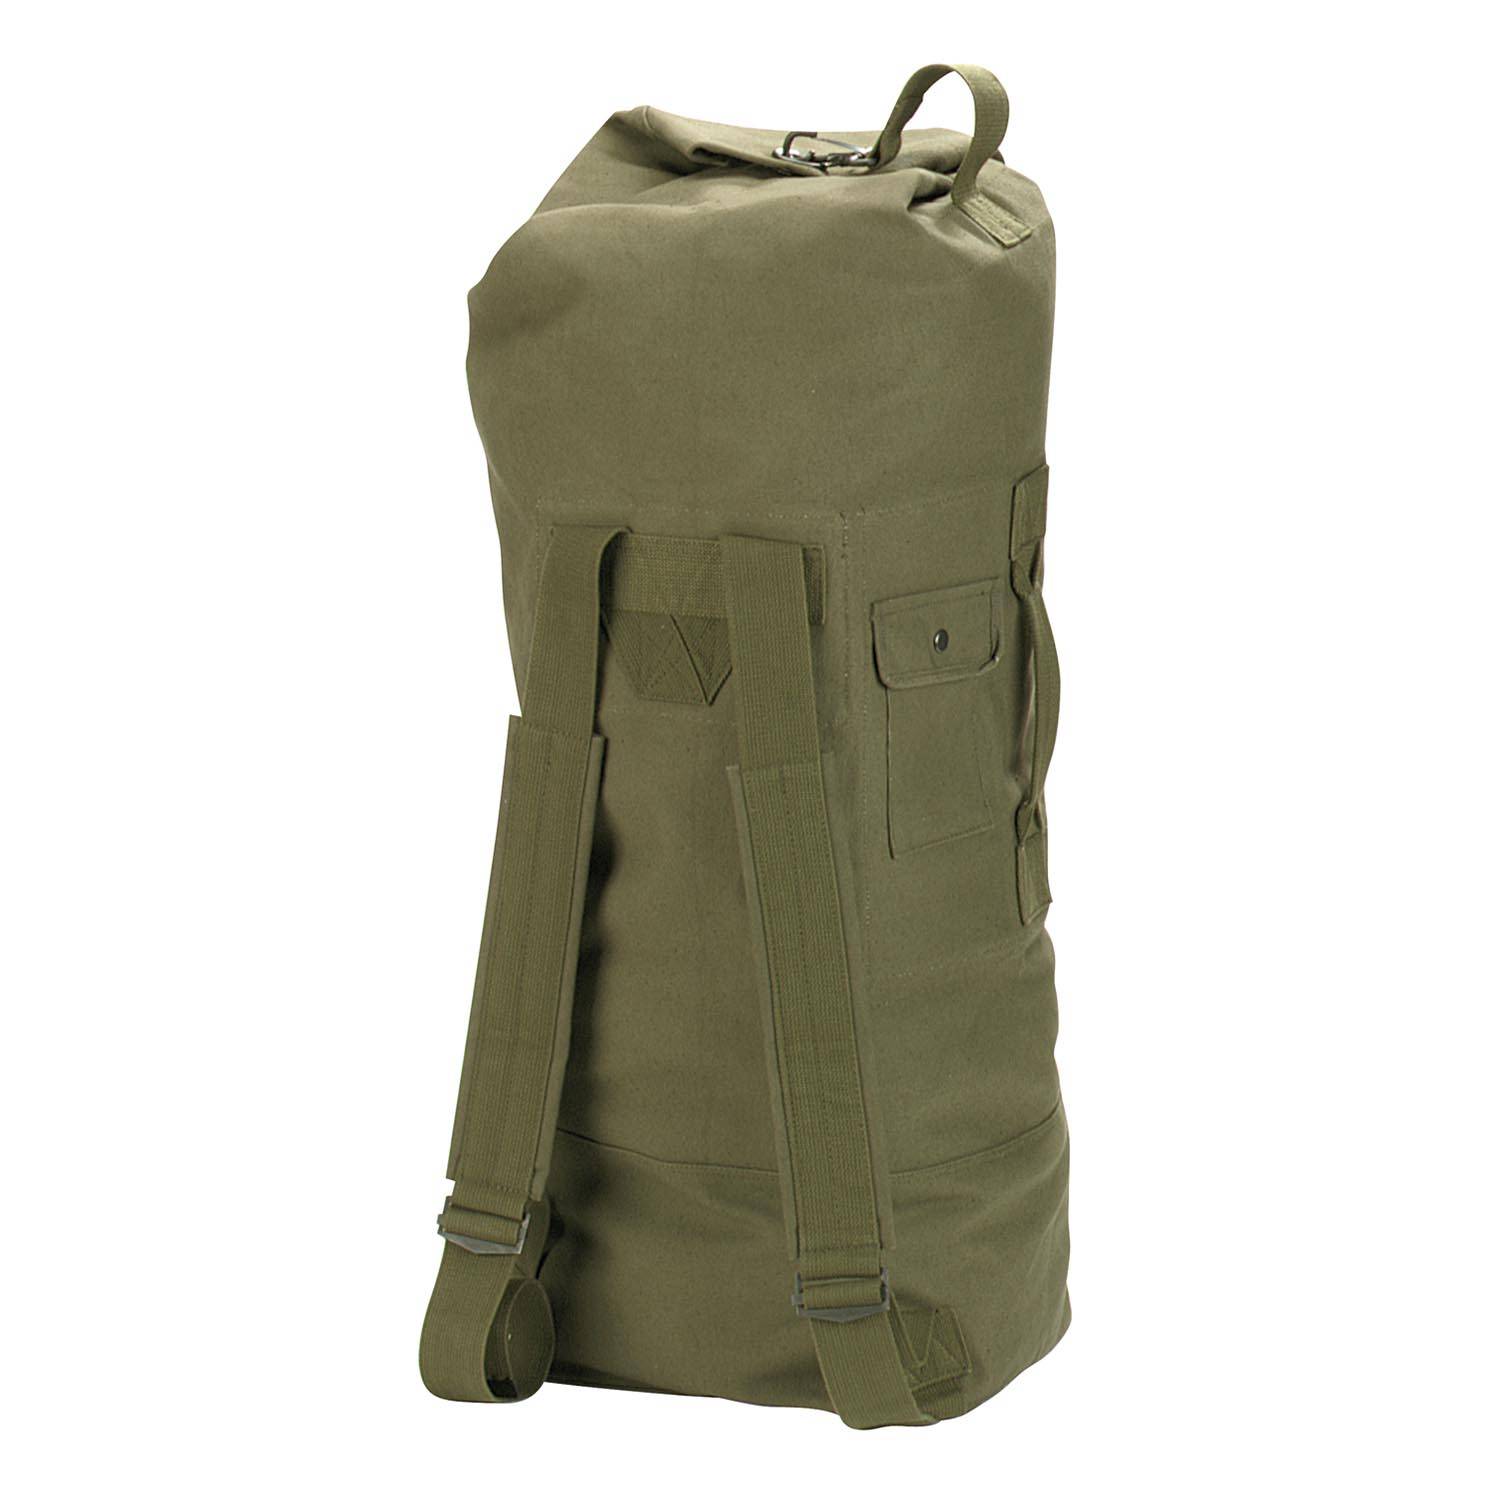 ROTHCO G.I. STYLE CANVAS DOUBLE STRAP DUFFLE BAG